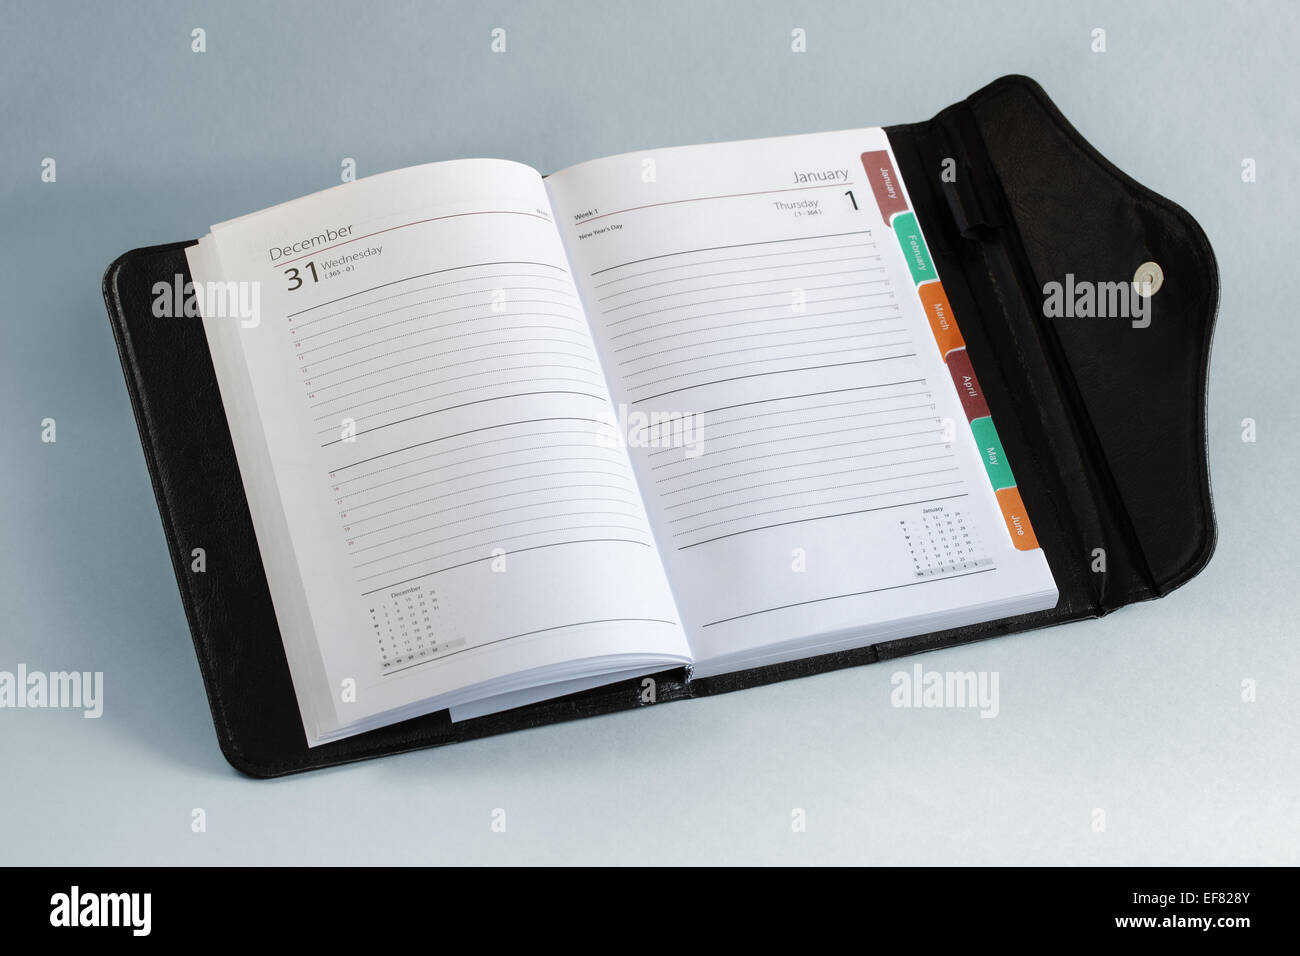 Diary or personal organizer planner open to blank page Stock Photo